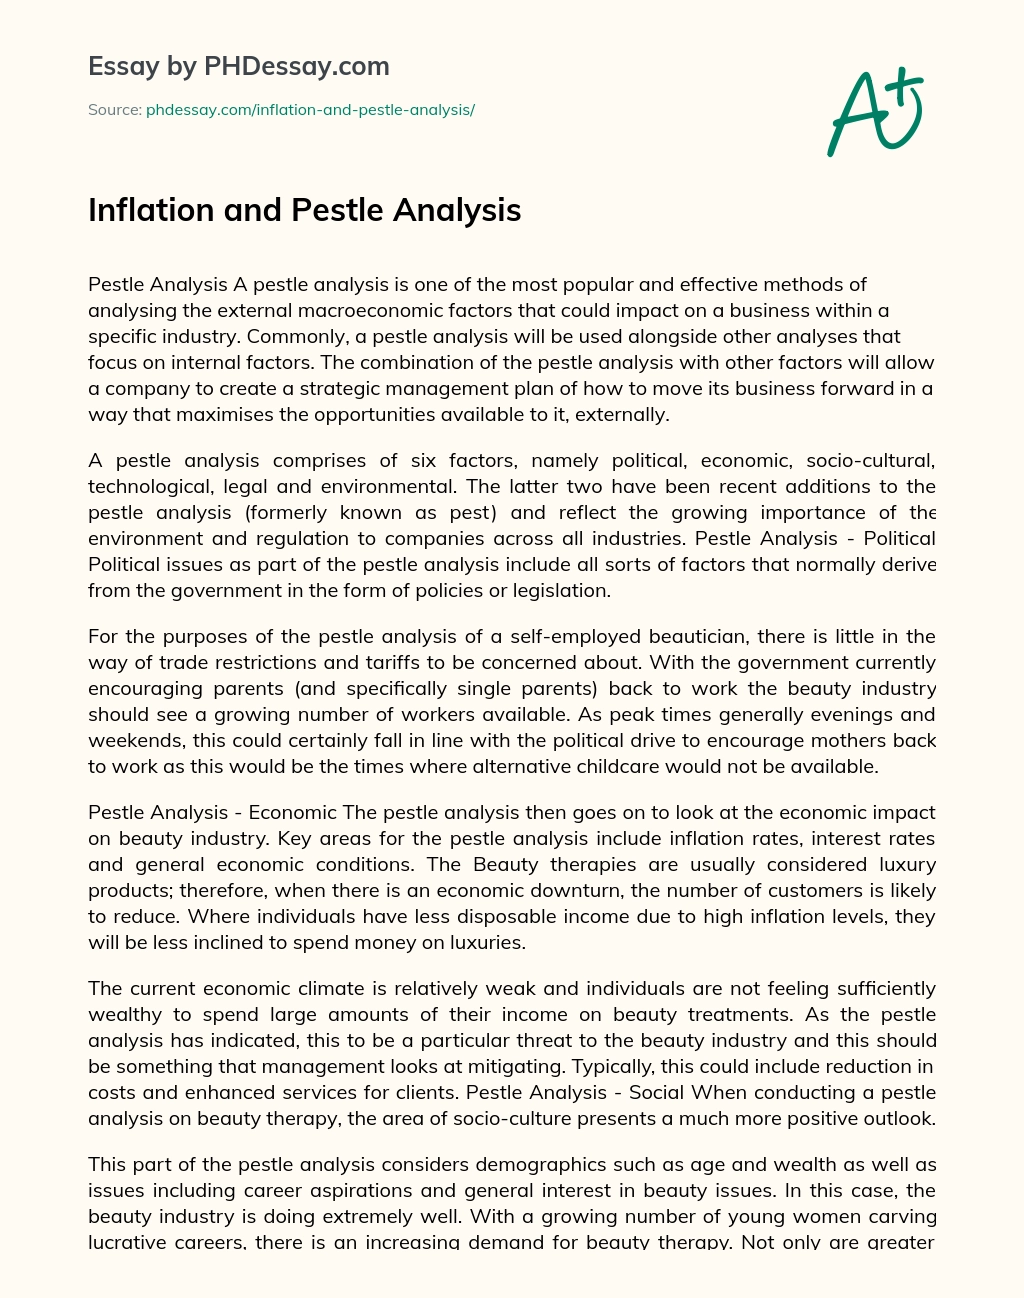 Inflation and Pestle Analysis essay